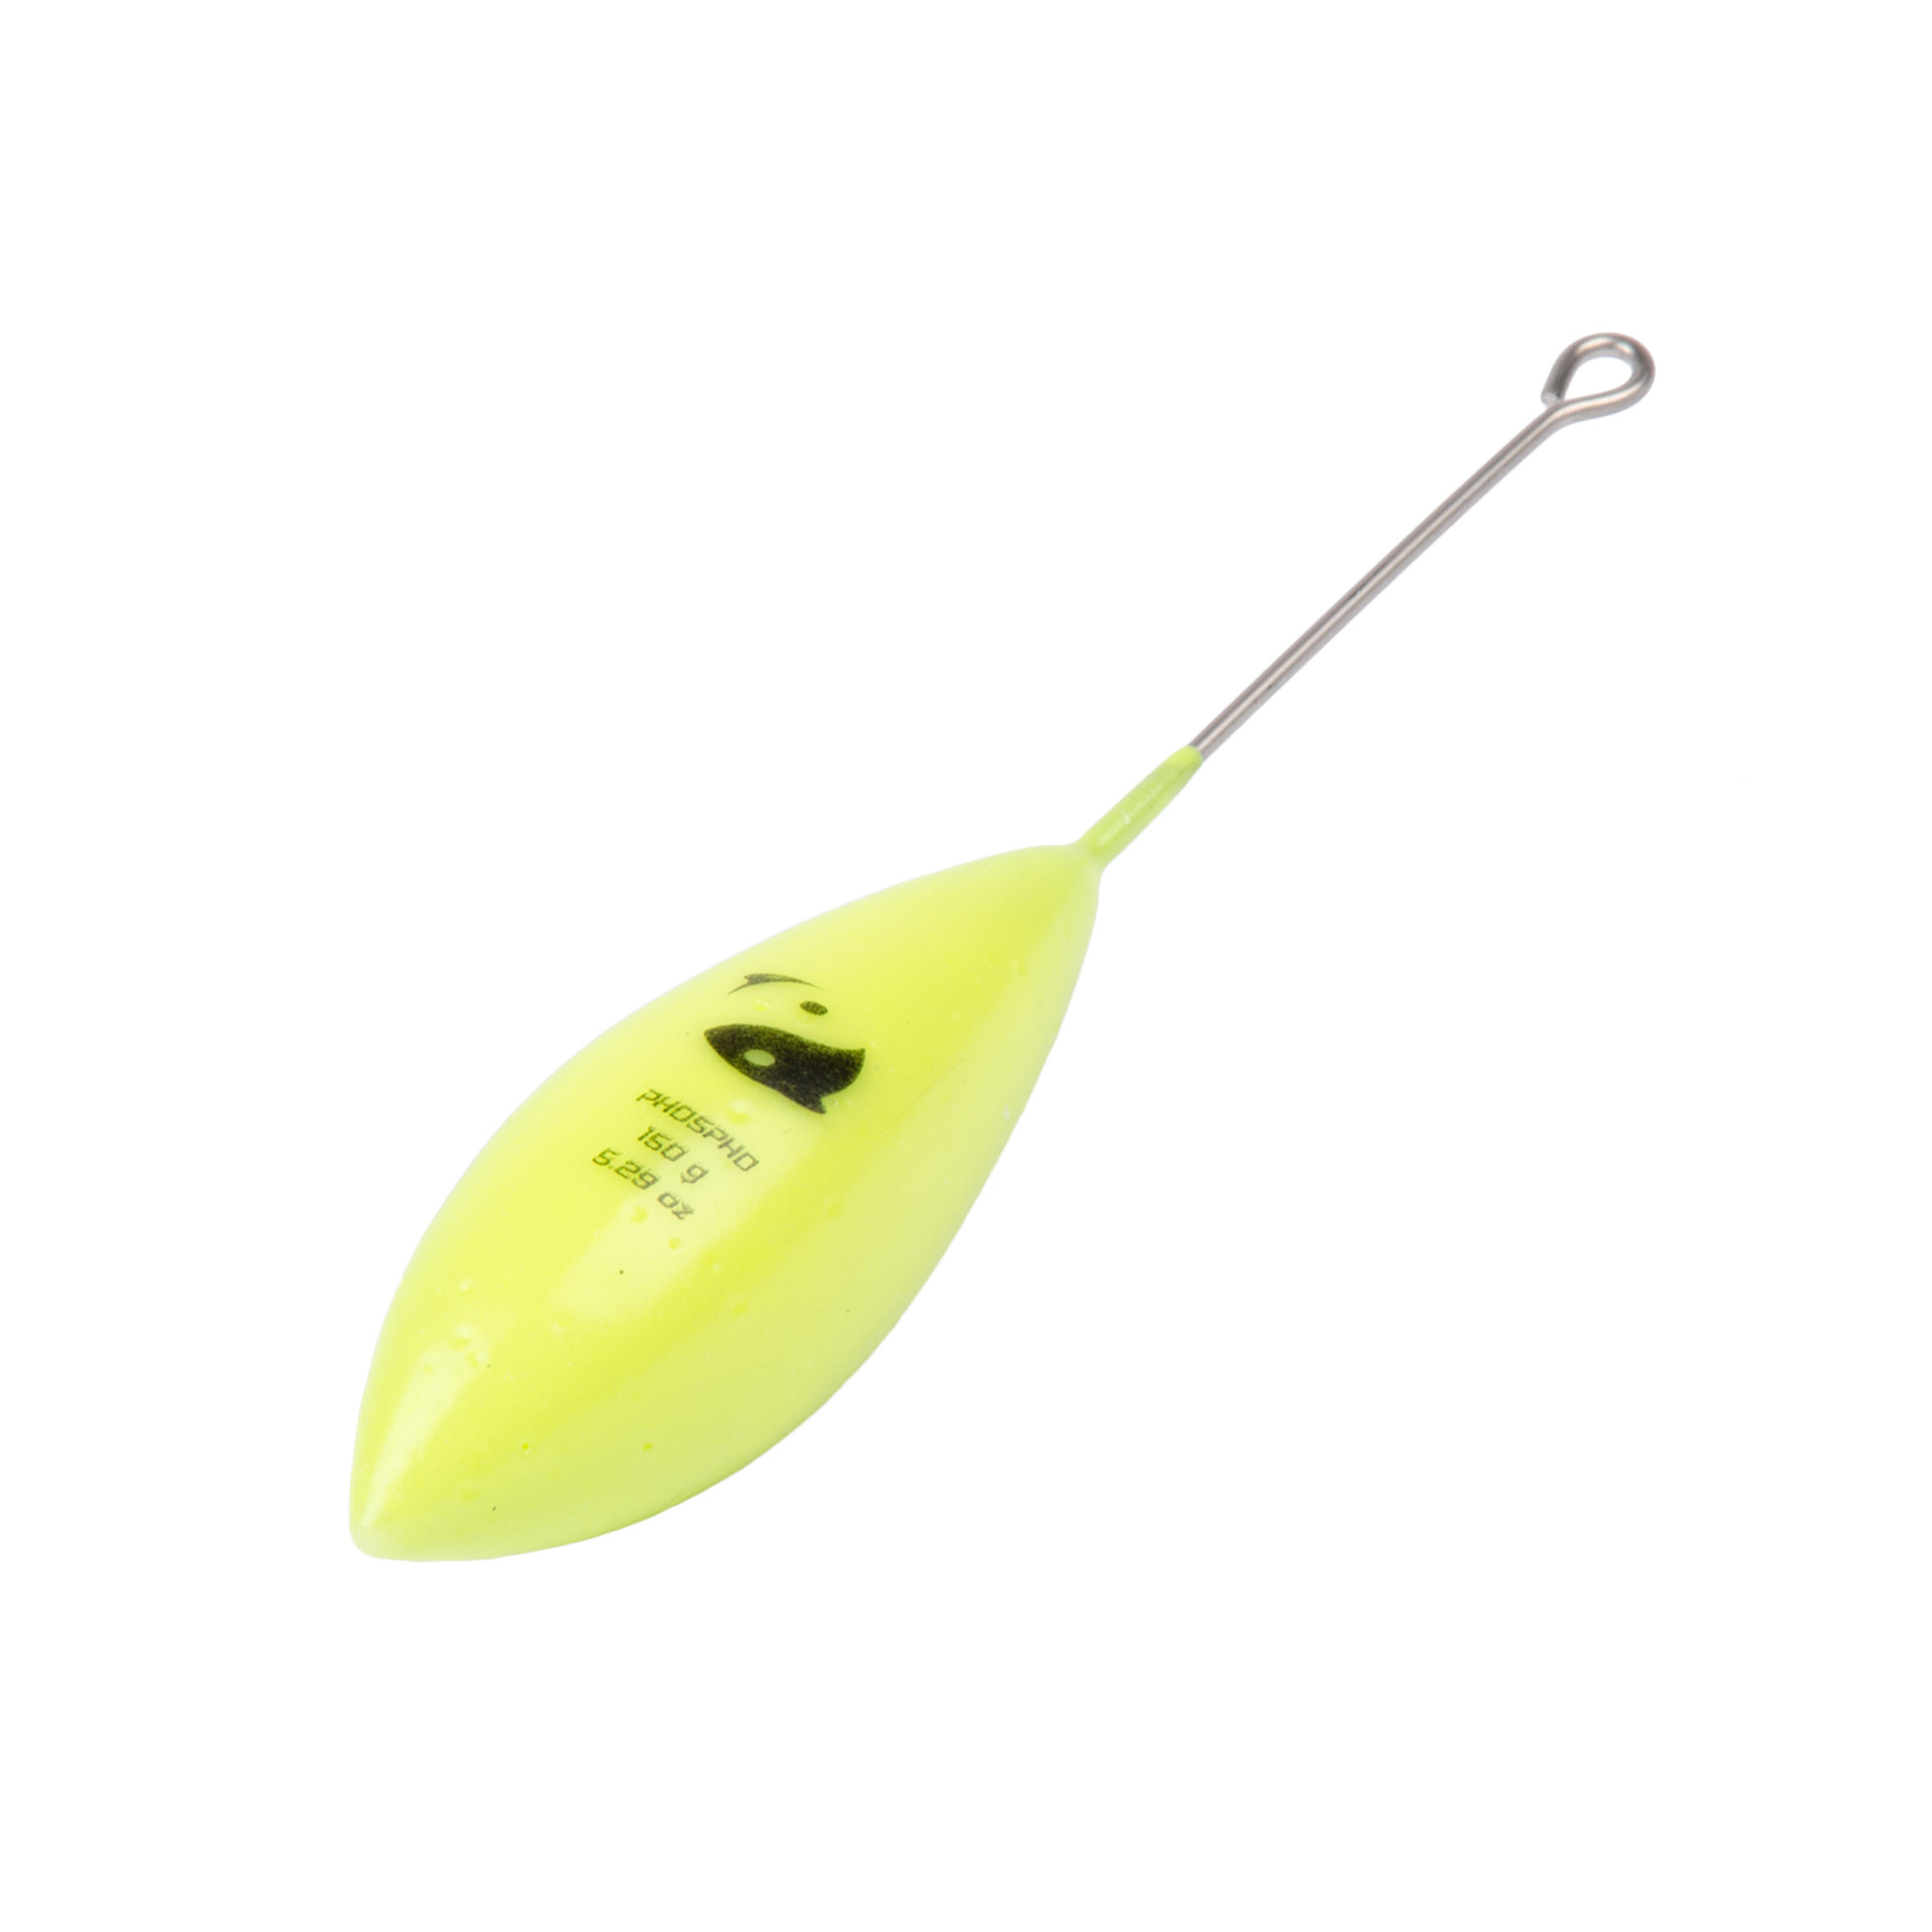 Fishing Surfcasting Bomb Sinker with Long Tail x2 - Phosphorescent Yellow 8/10